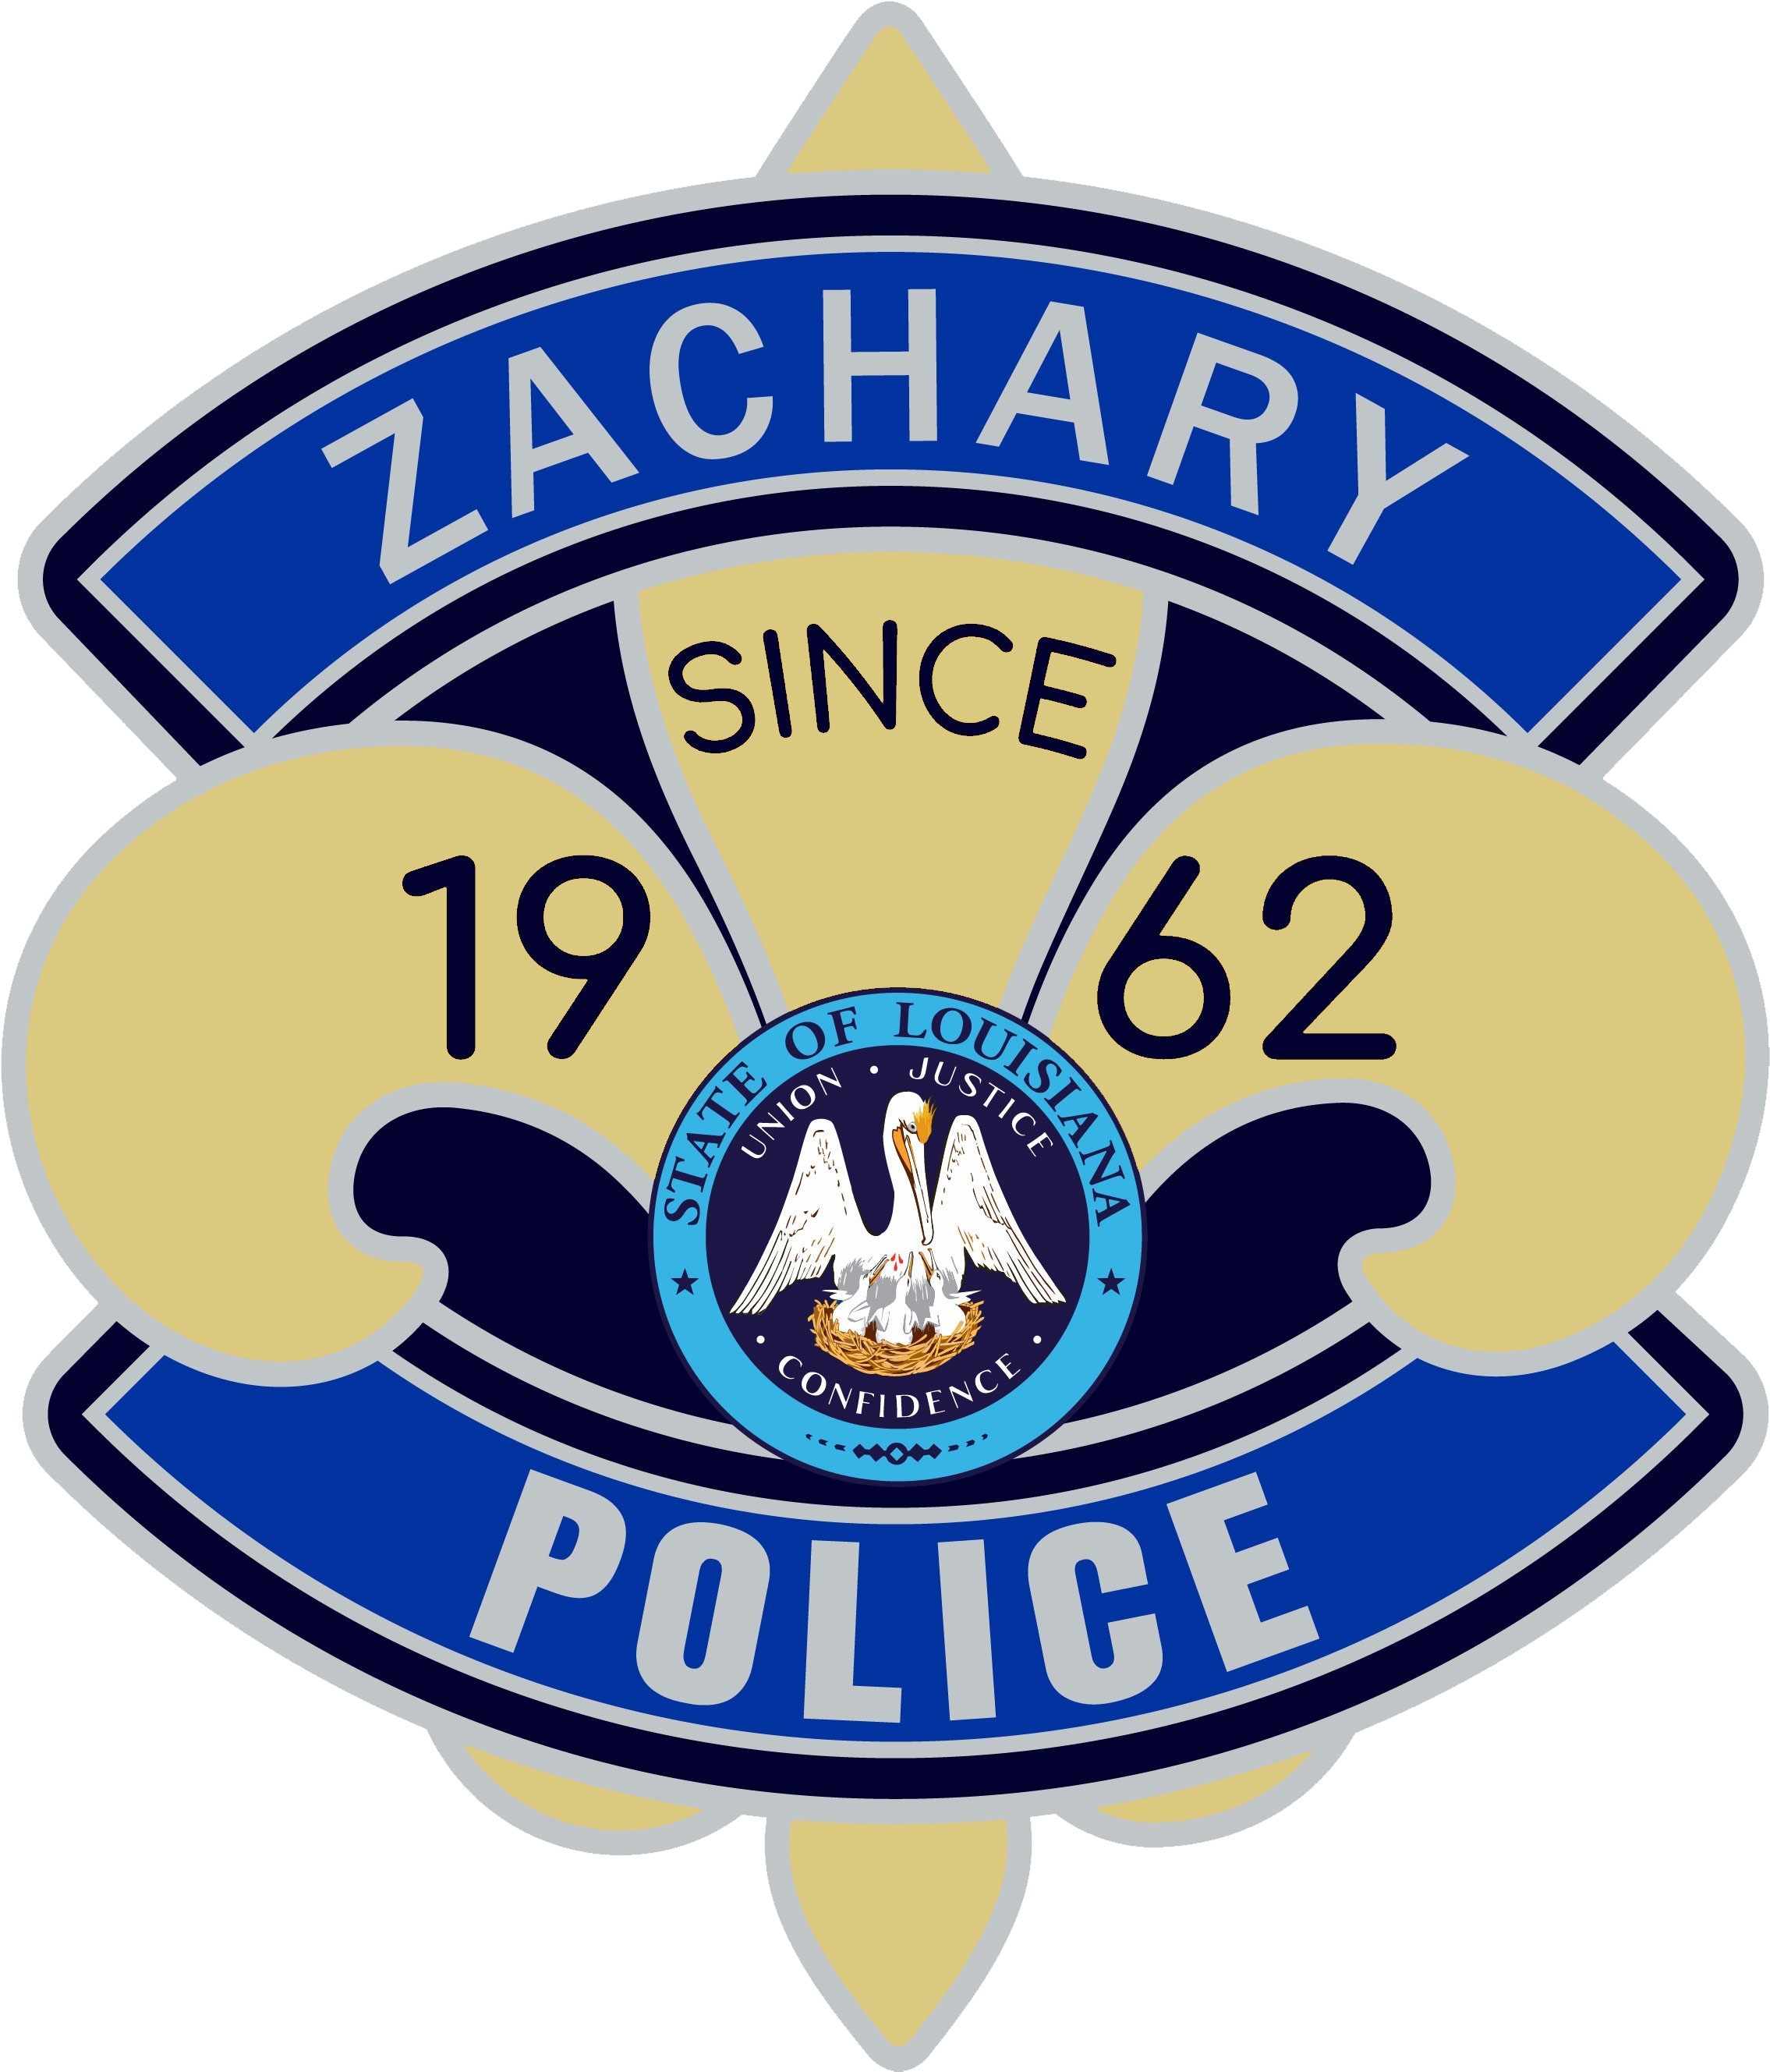 Zachary Police Department